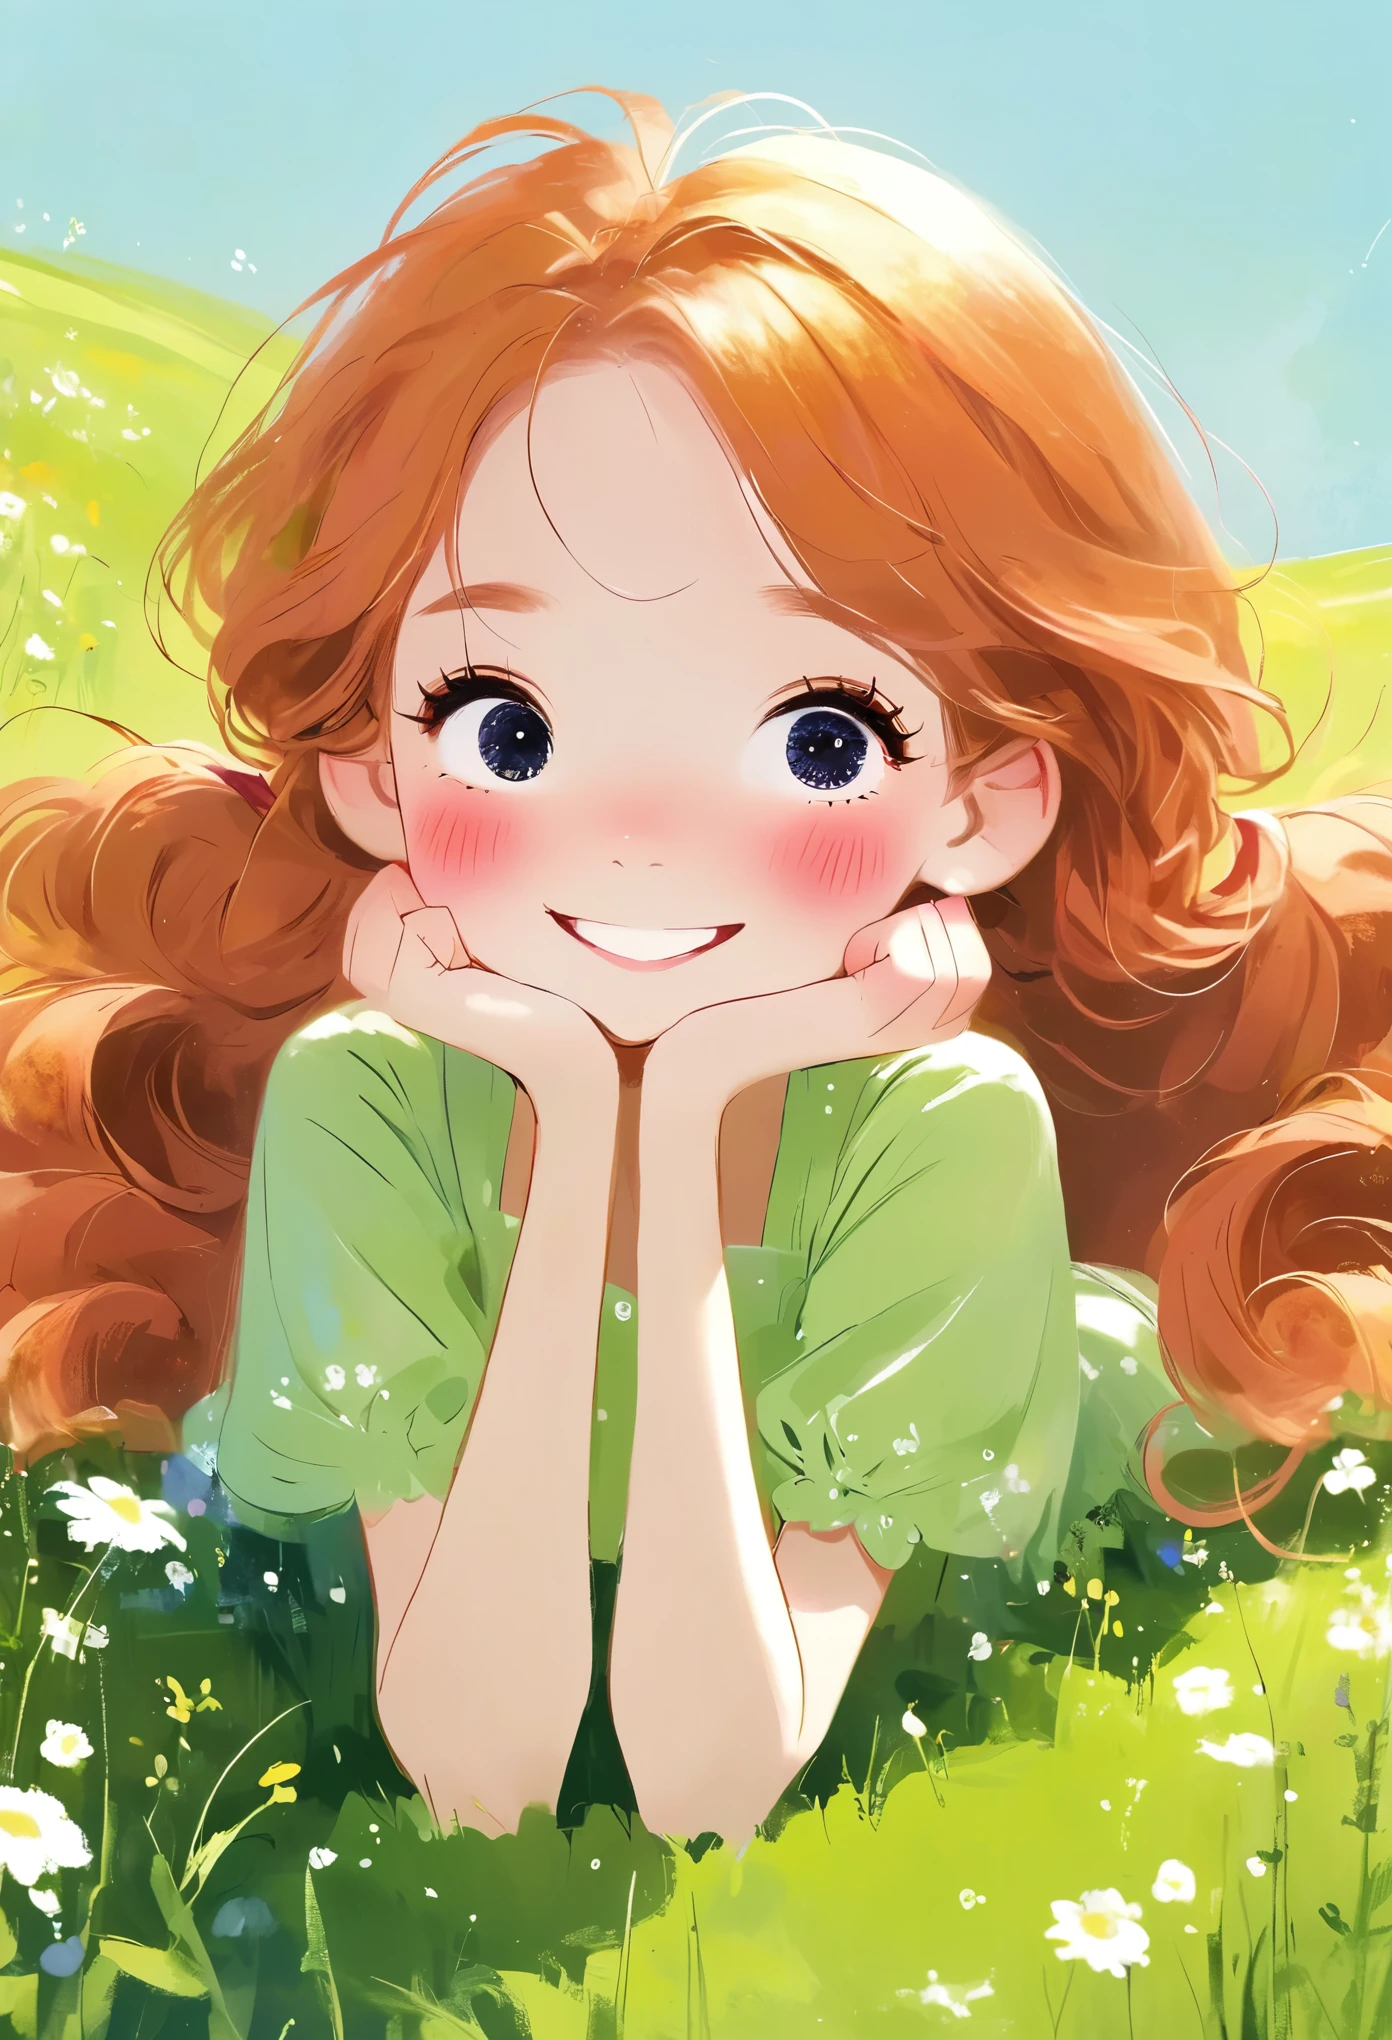 Rough texture，Hand-drawn style： cute girl, Round eyes, Smile, Mid-chest,
Orange Hair, Medium Length Hair, Side Ponytail, ,
panoramic, Upper Body, Lay down,
Pink skirt, floating dress, ,
On the summer meadow